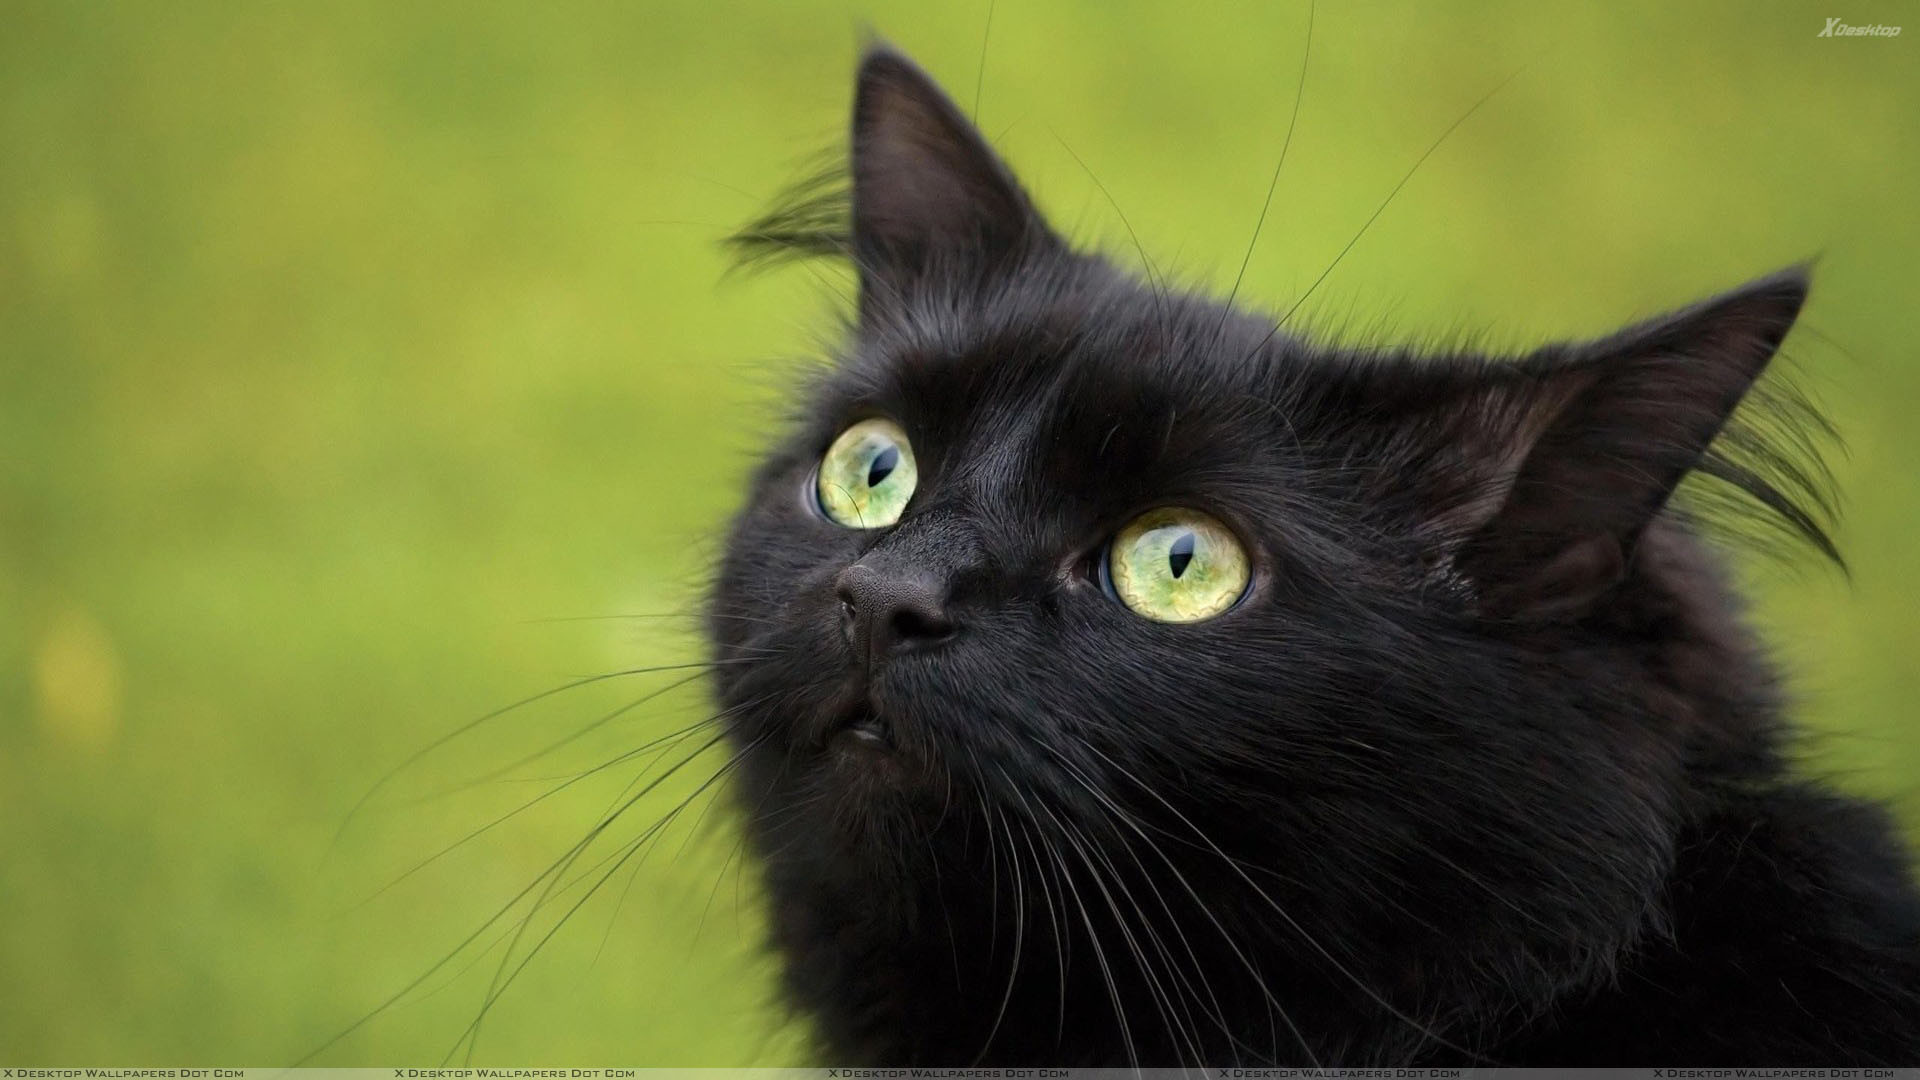 1920x1080 You are viewing wallpaper titled "Black Cat In Green Eyes ...